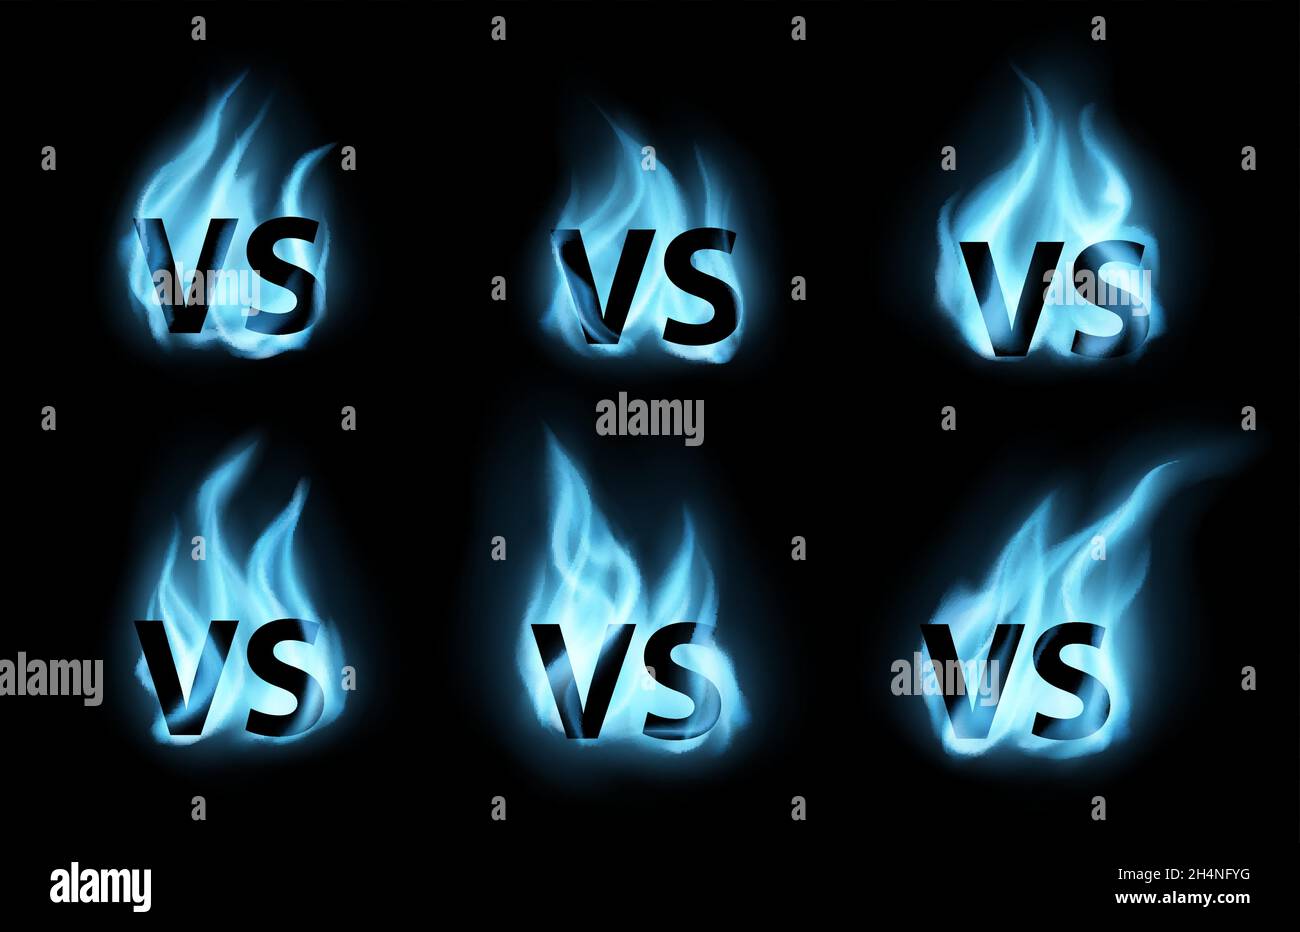 VS and versus vector signs with blue gas fire flames. VS battle challenge isolated symbols of sport game match, boxing fight, team competition or duel Stock Vector